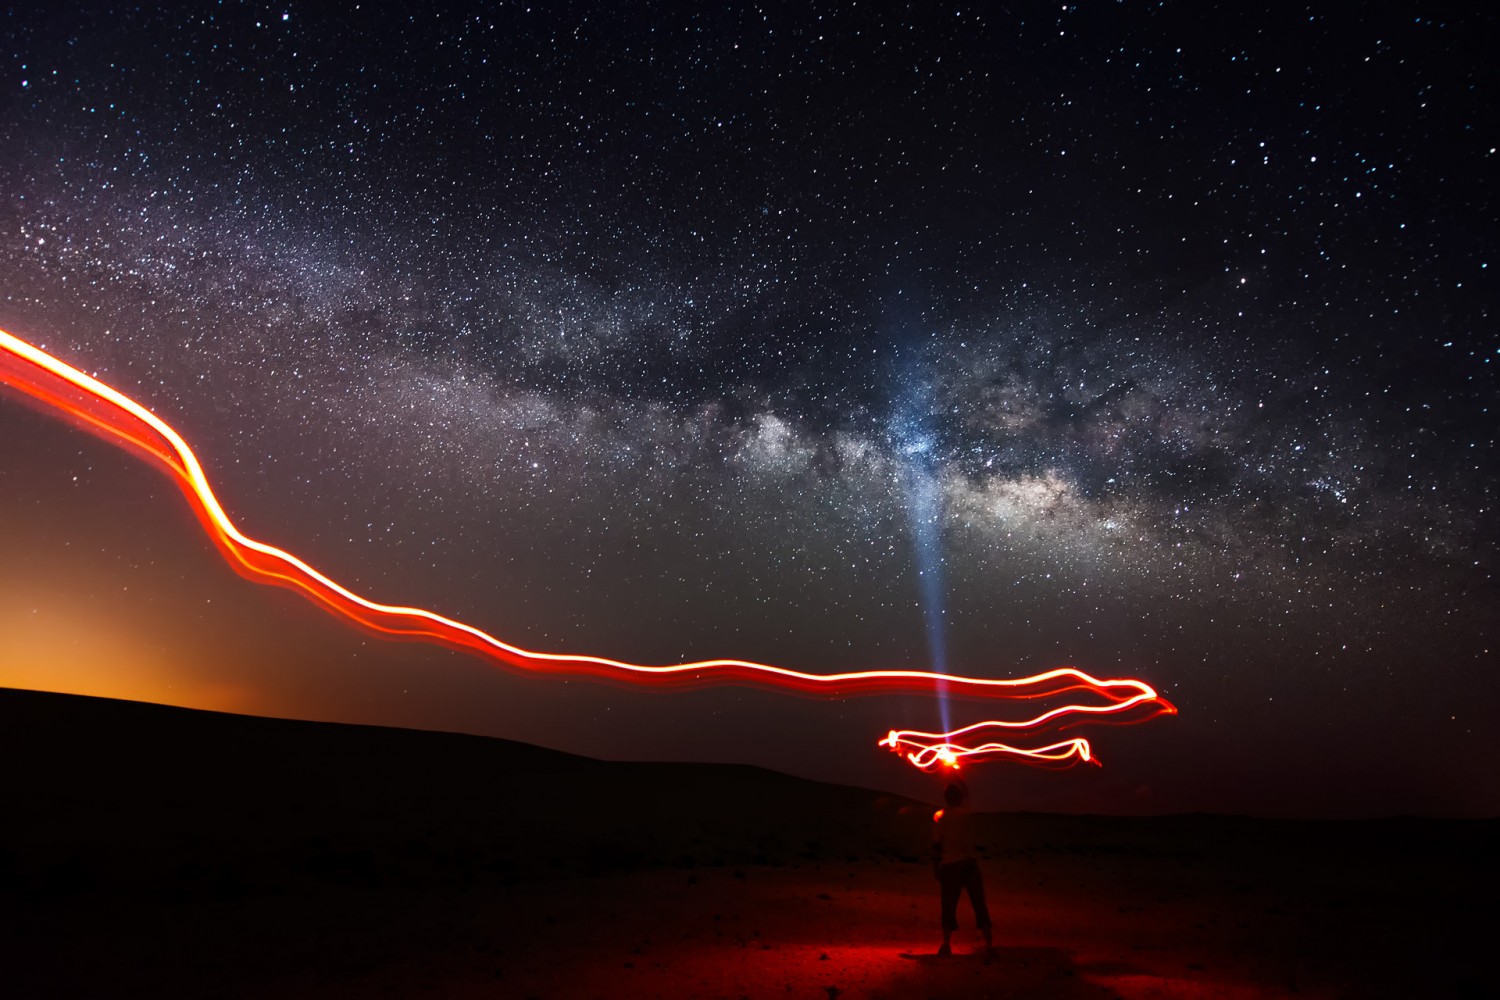 How To Shoot An Electrifying Self-Portrait Under The Milky Way